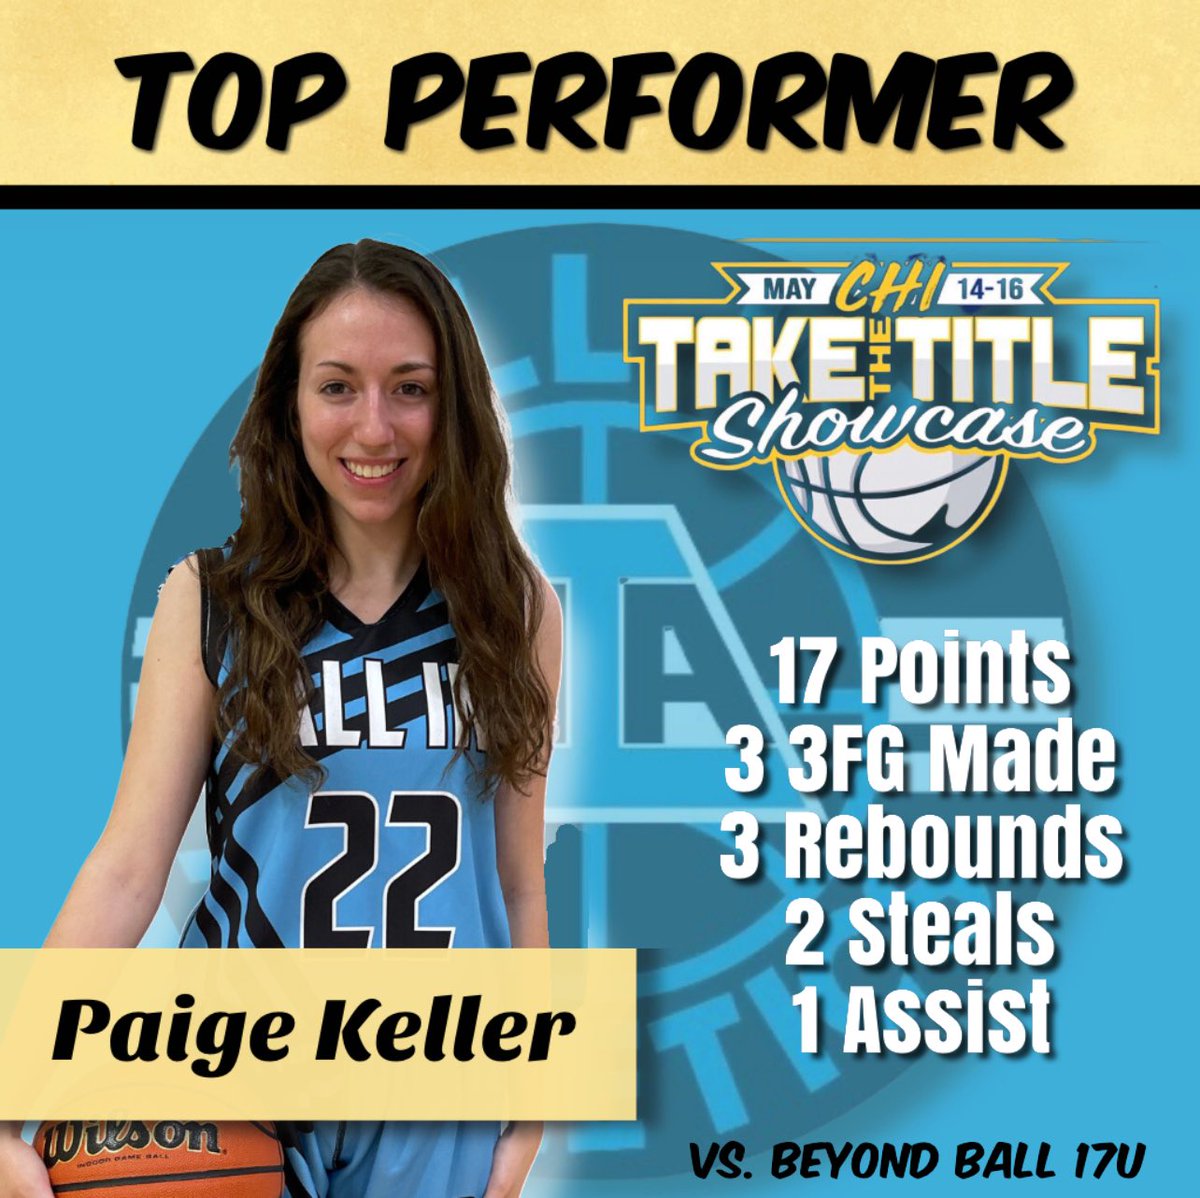 Another #ALLIN Top Performer from the @jrallstarevents Take The Title Showcase - 2022 guard @PaigeKeller22 of Crystal Lake Central High School! Paige has shot lights out from behind the arc all season 👌 She put up a game high 17 points & 3 three’s in a win over Beyond Ball!